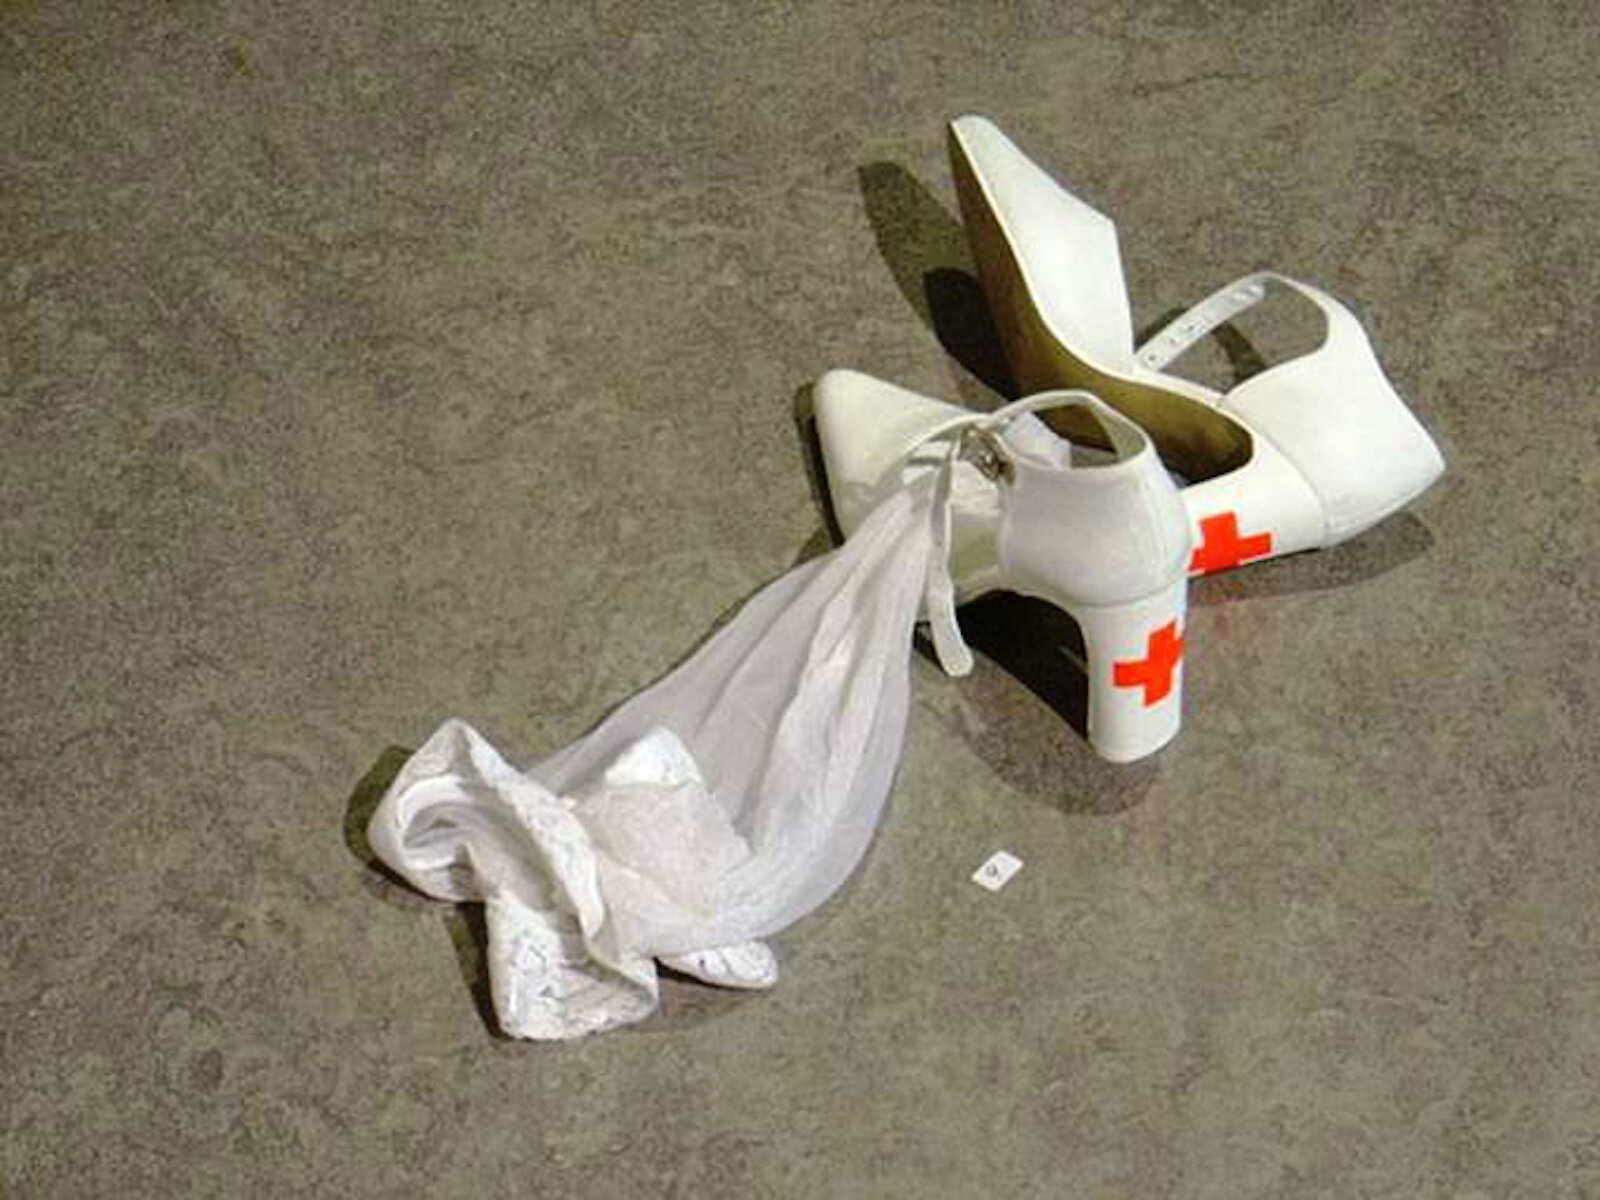 Red Cross Shoes & stay-up stockings on floor.jpg